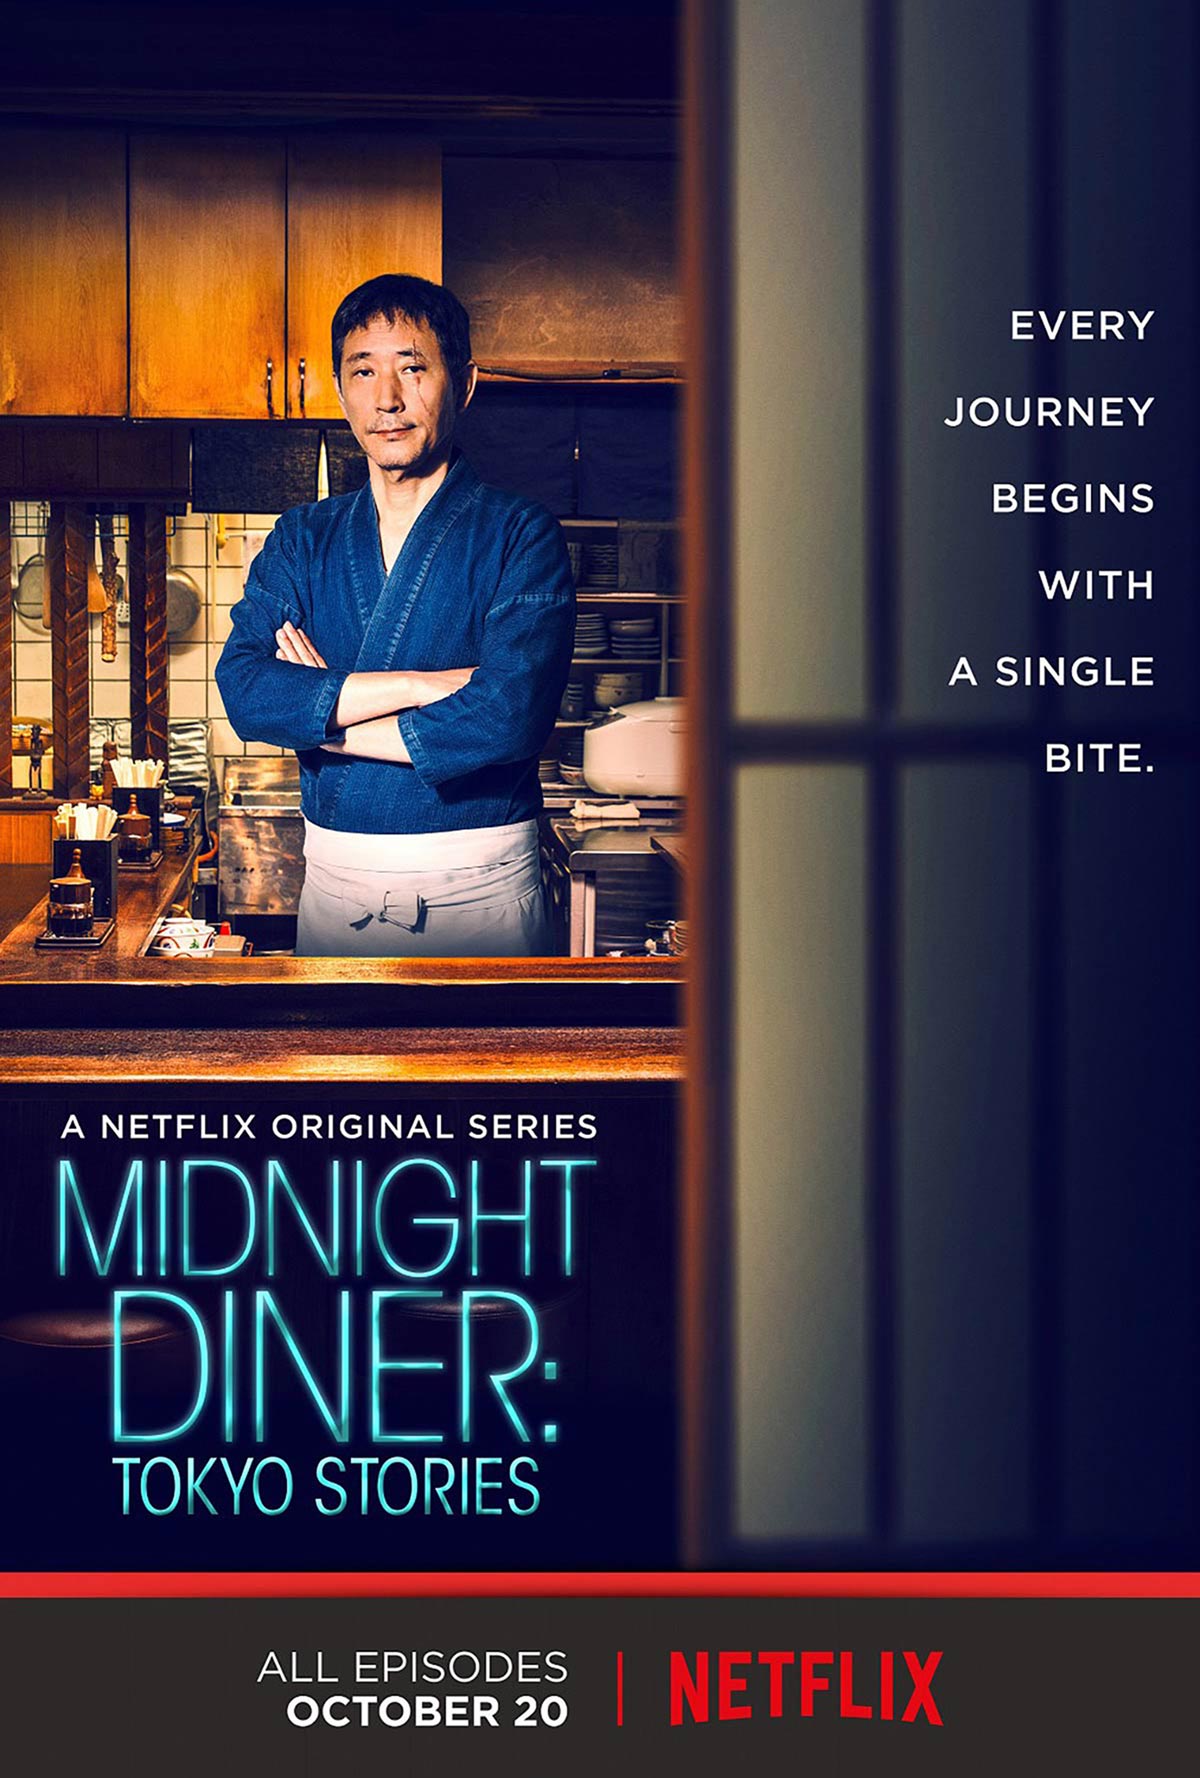 080_dreamogram-iconisus-key-art-movie-poster-midnight-diner_vertical-cover